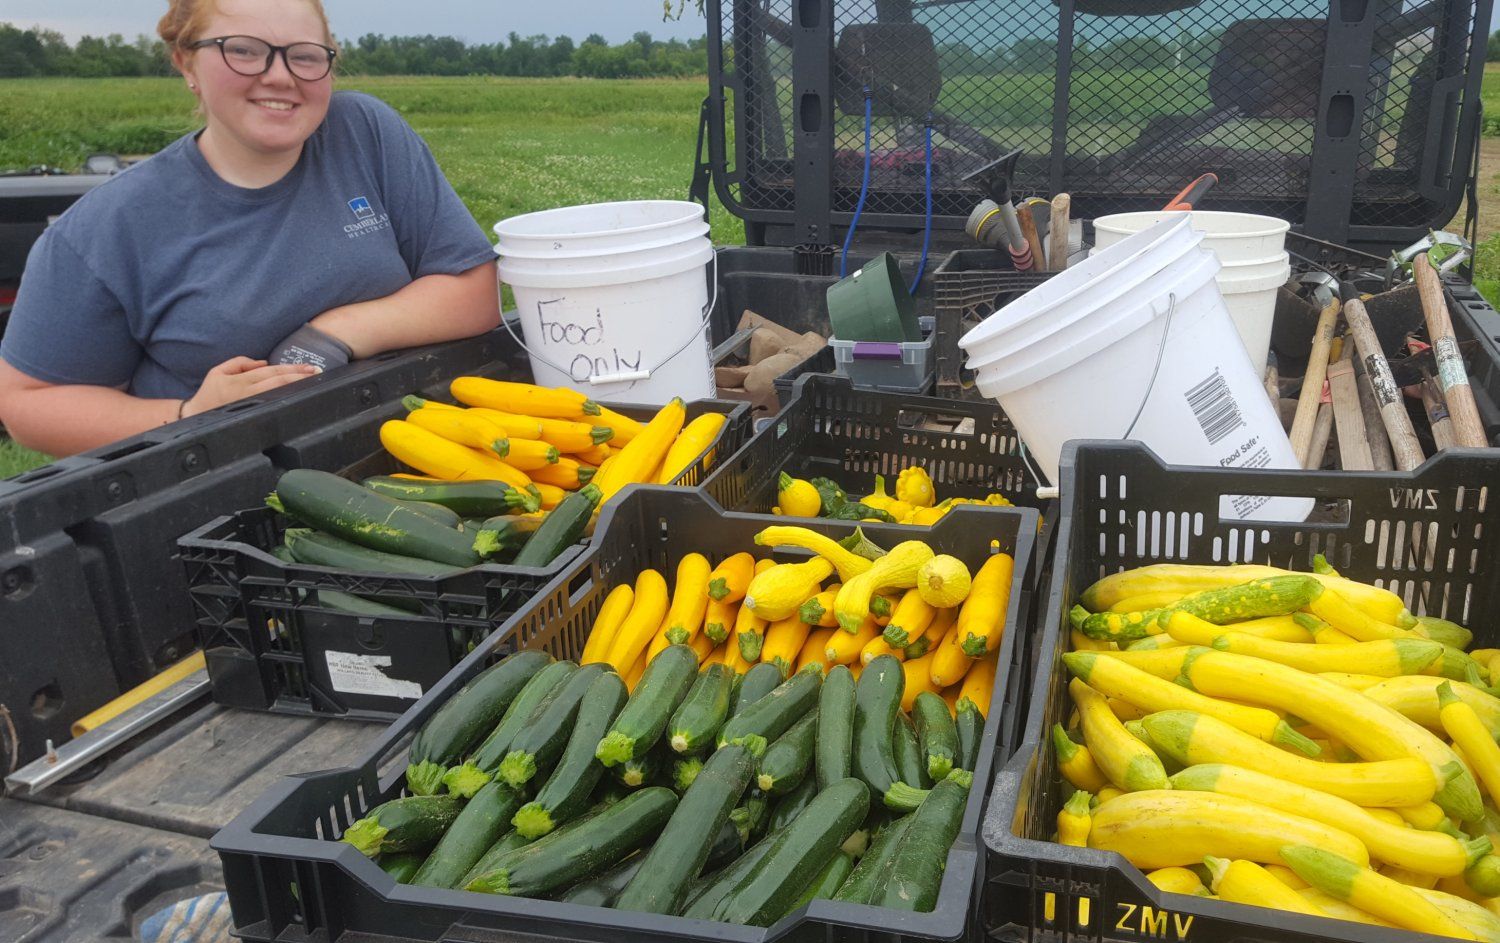 Next Happening: Farm Share for July 27-28, 2022